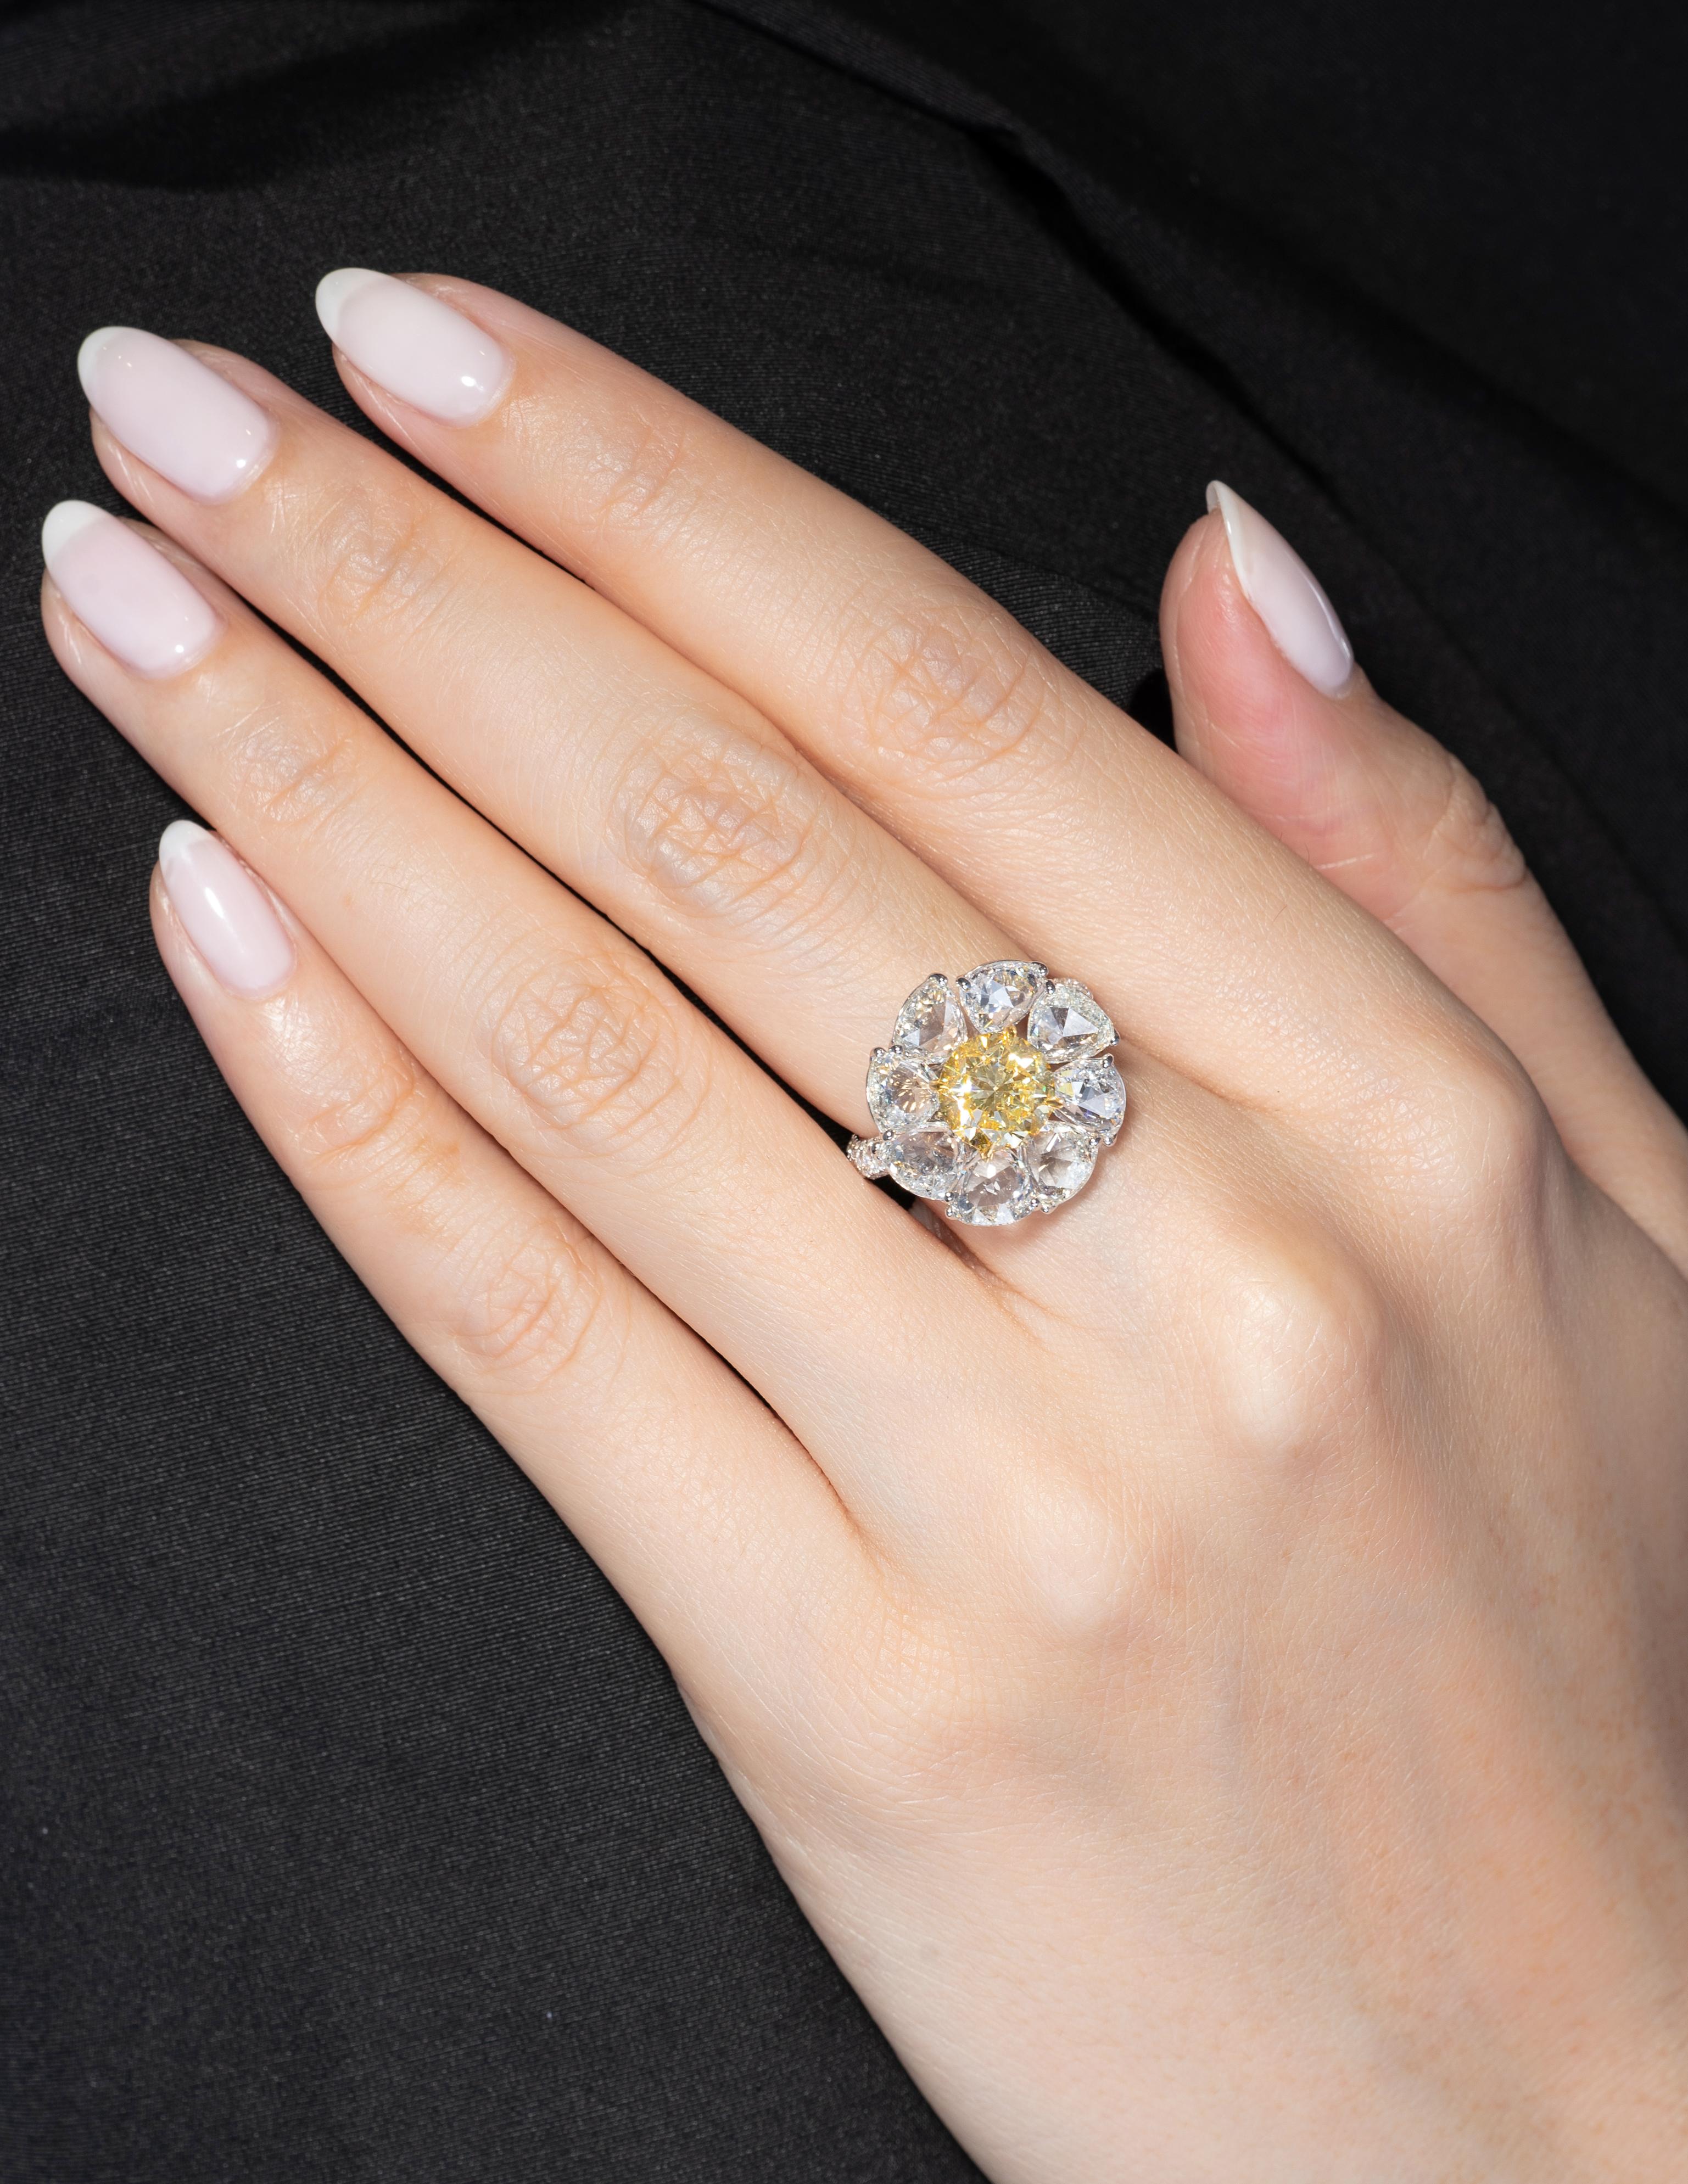 This piece is available for custom order only. 

This ring will always put a smile on your face! Our special daisy diamond ring features a 2.09ct round brilliant Fancy Yellow Diamond that has been GIA Certified #1162731886 (VVS2 clarity) and 4.40cts